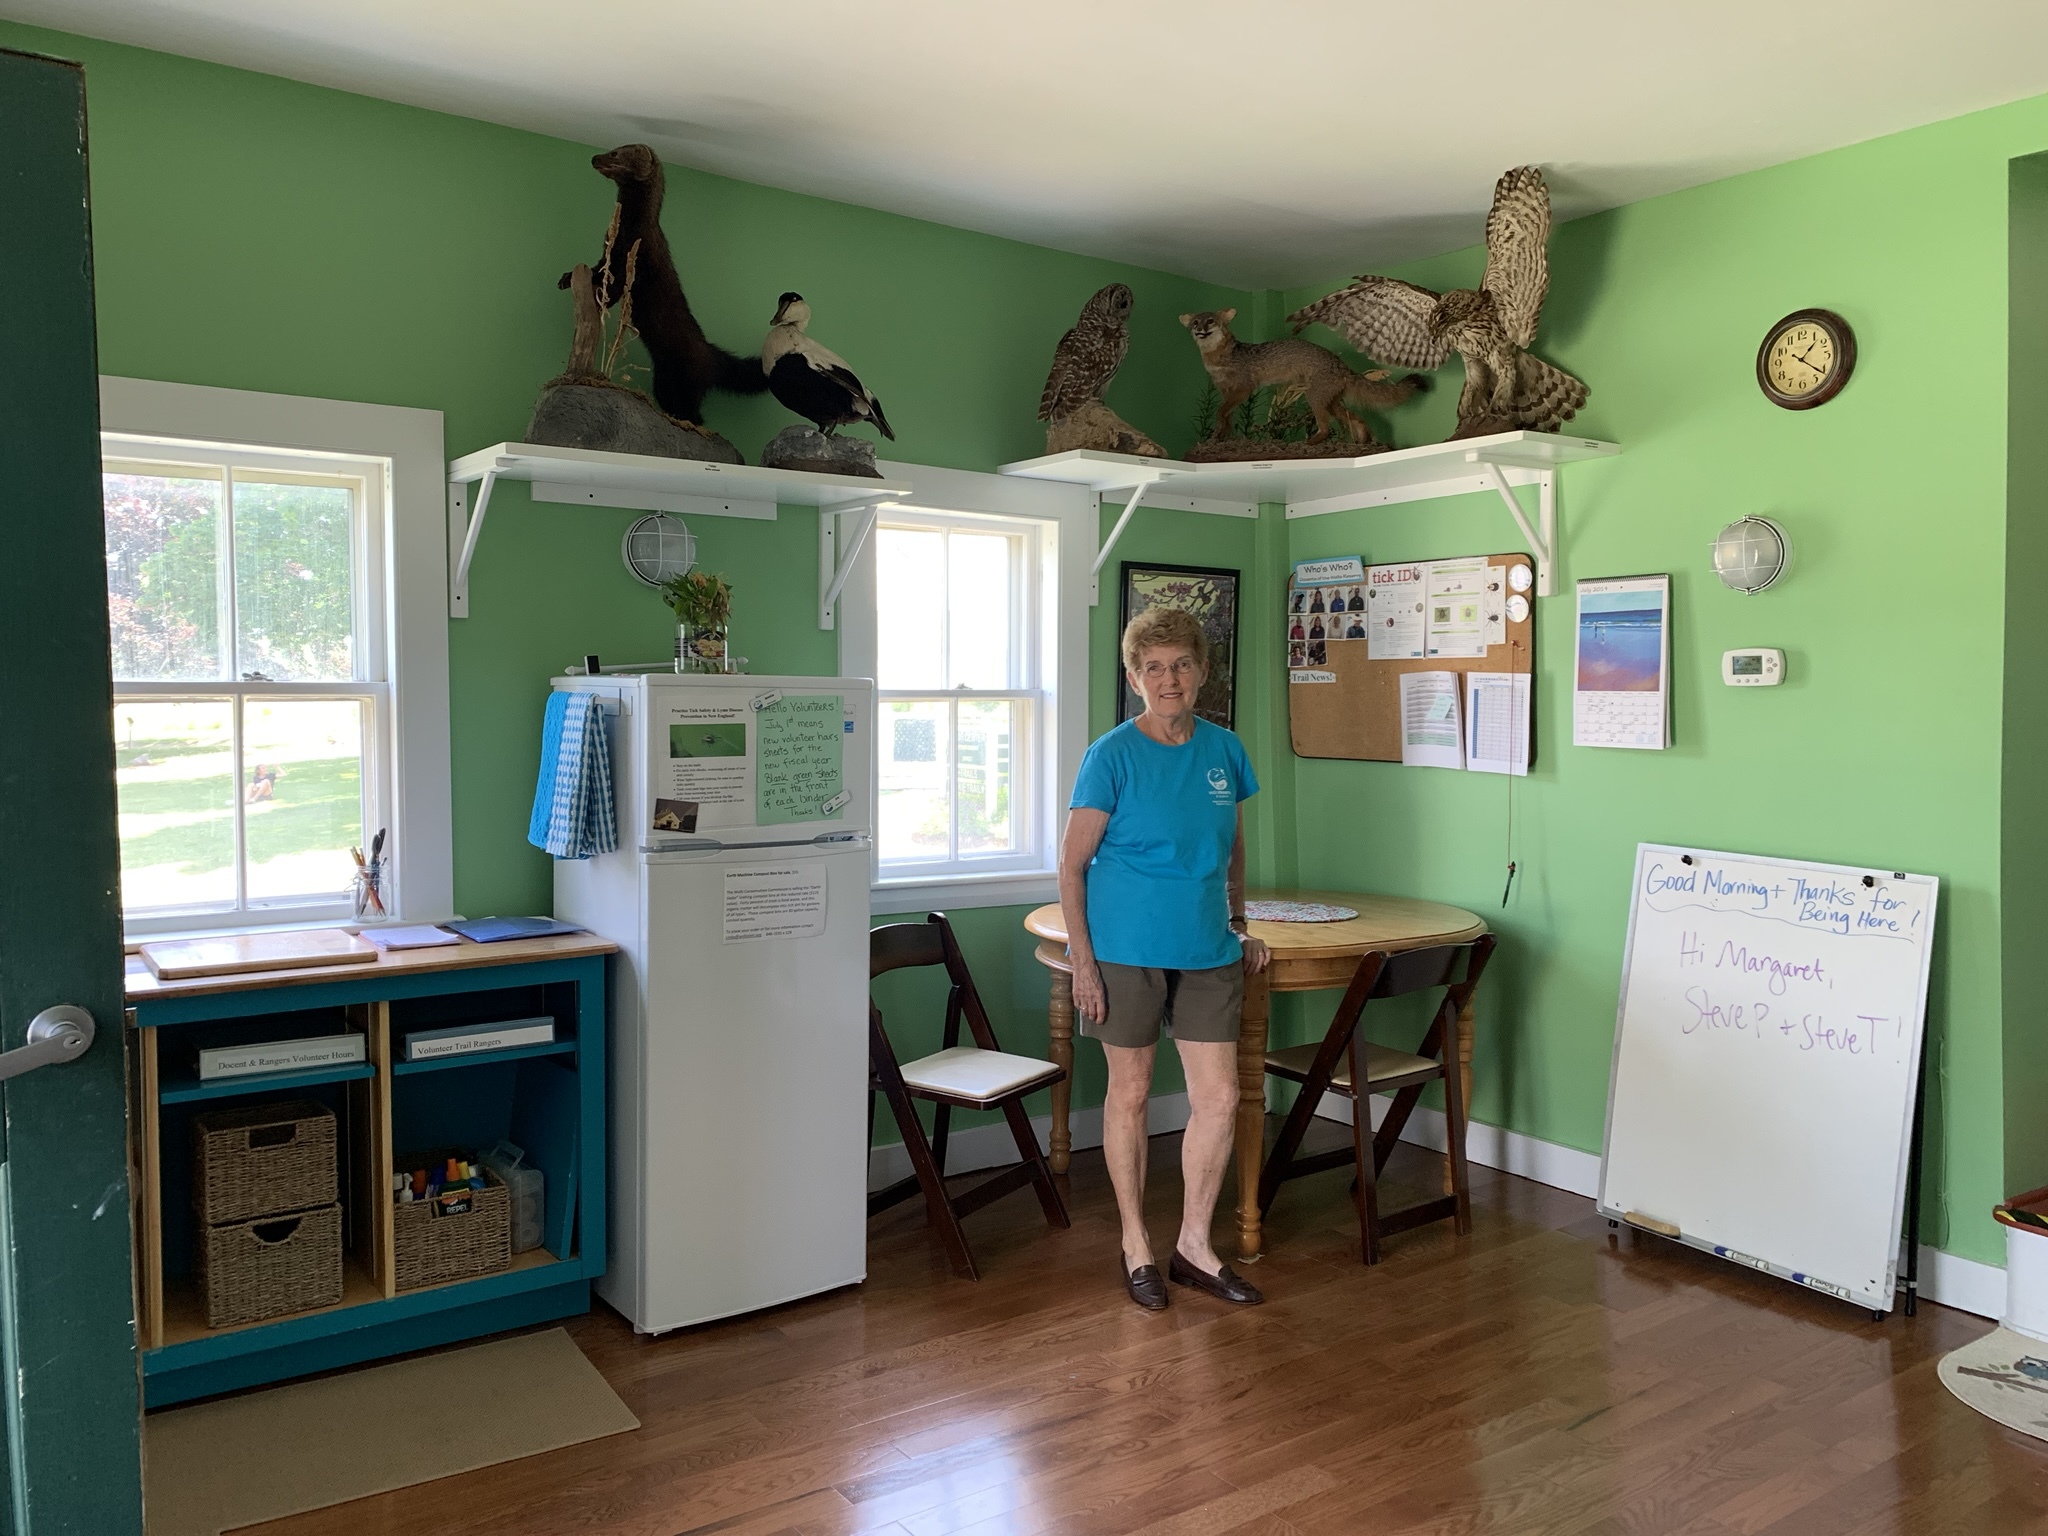 Volunteer Carolyn Broad and the walls she painted "picnic" green for the docent room remodel. Photo by Amy Maden.